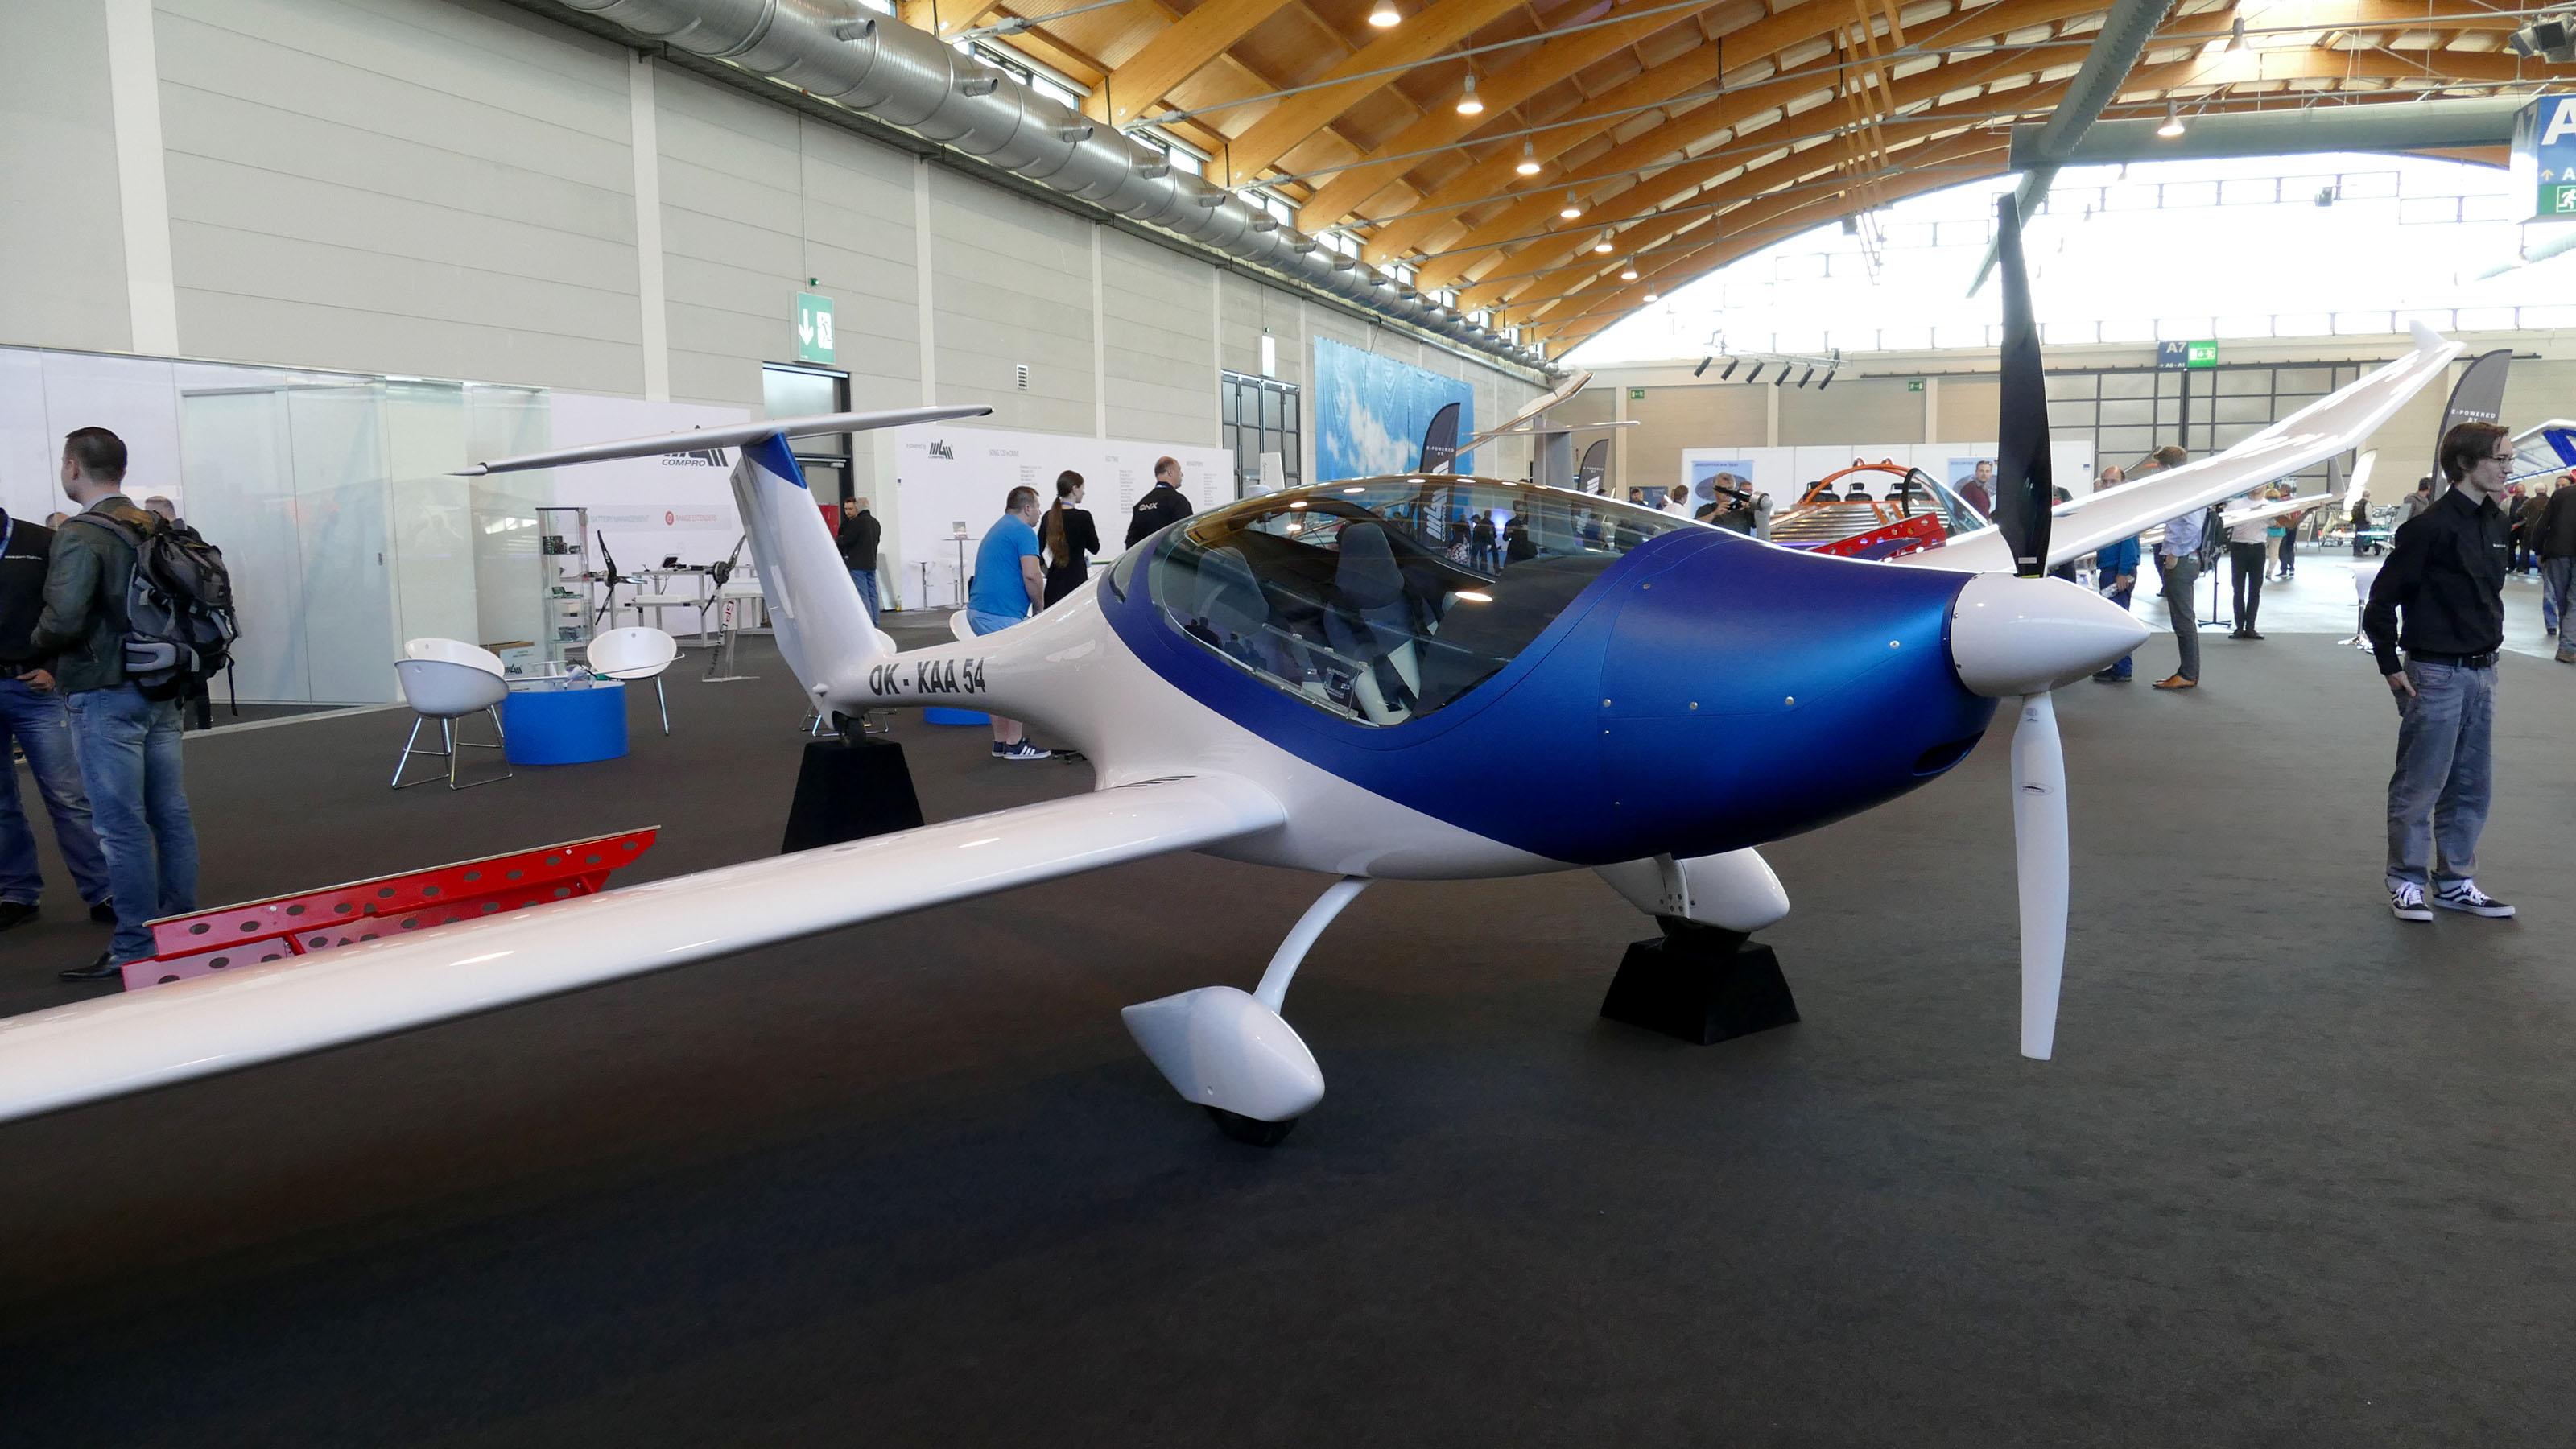 The Czech-built ΦNIX electric motorglider can fly as long as 2.5 hours on a single charge of its lithium-ion battery. Photo by Tom Horne.